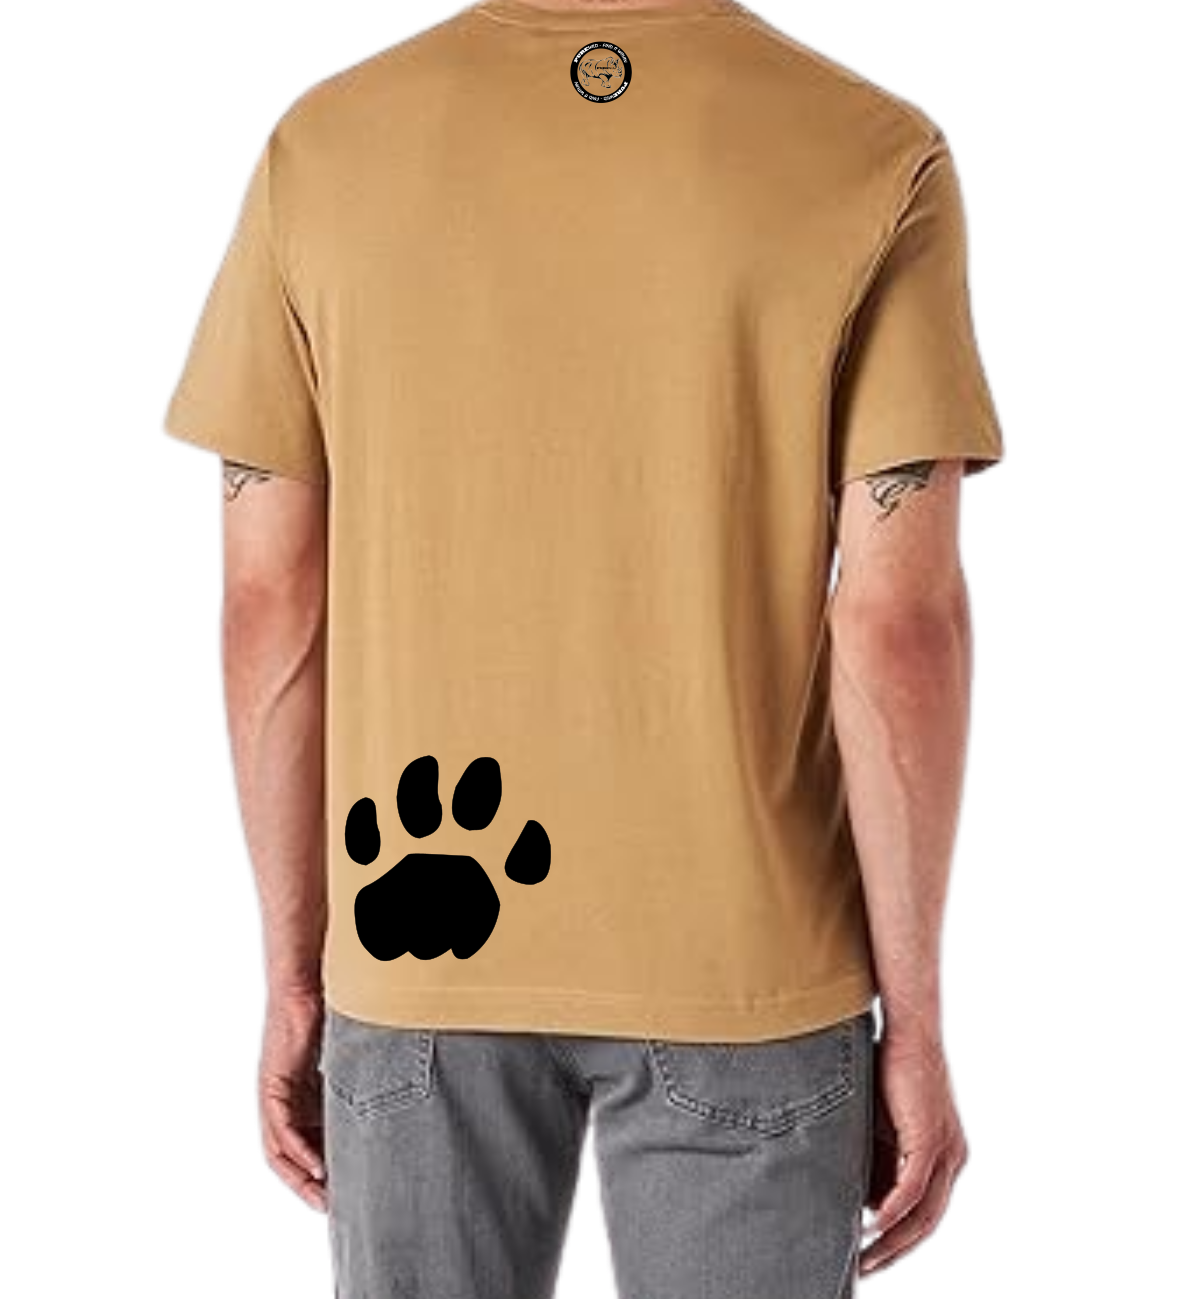 Lion T-Shirt For A Real Man